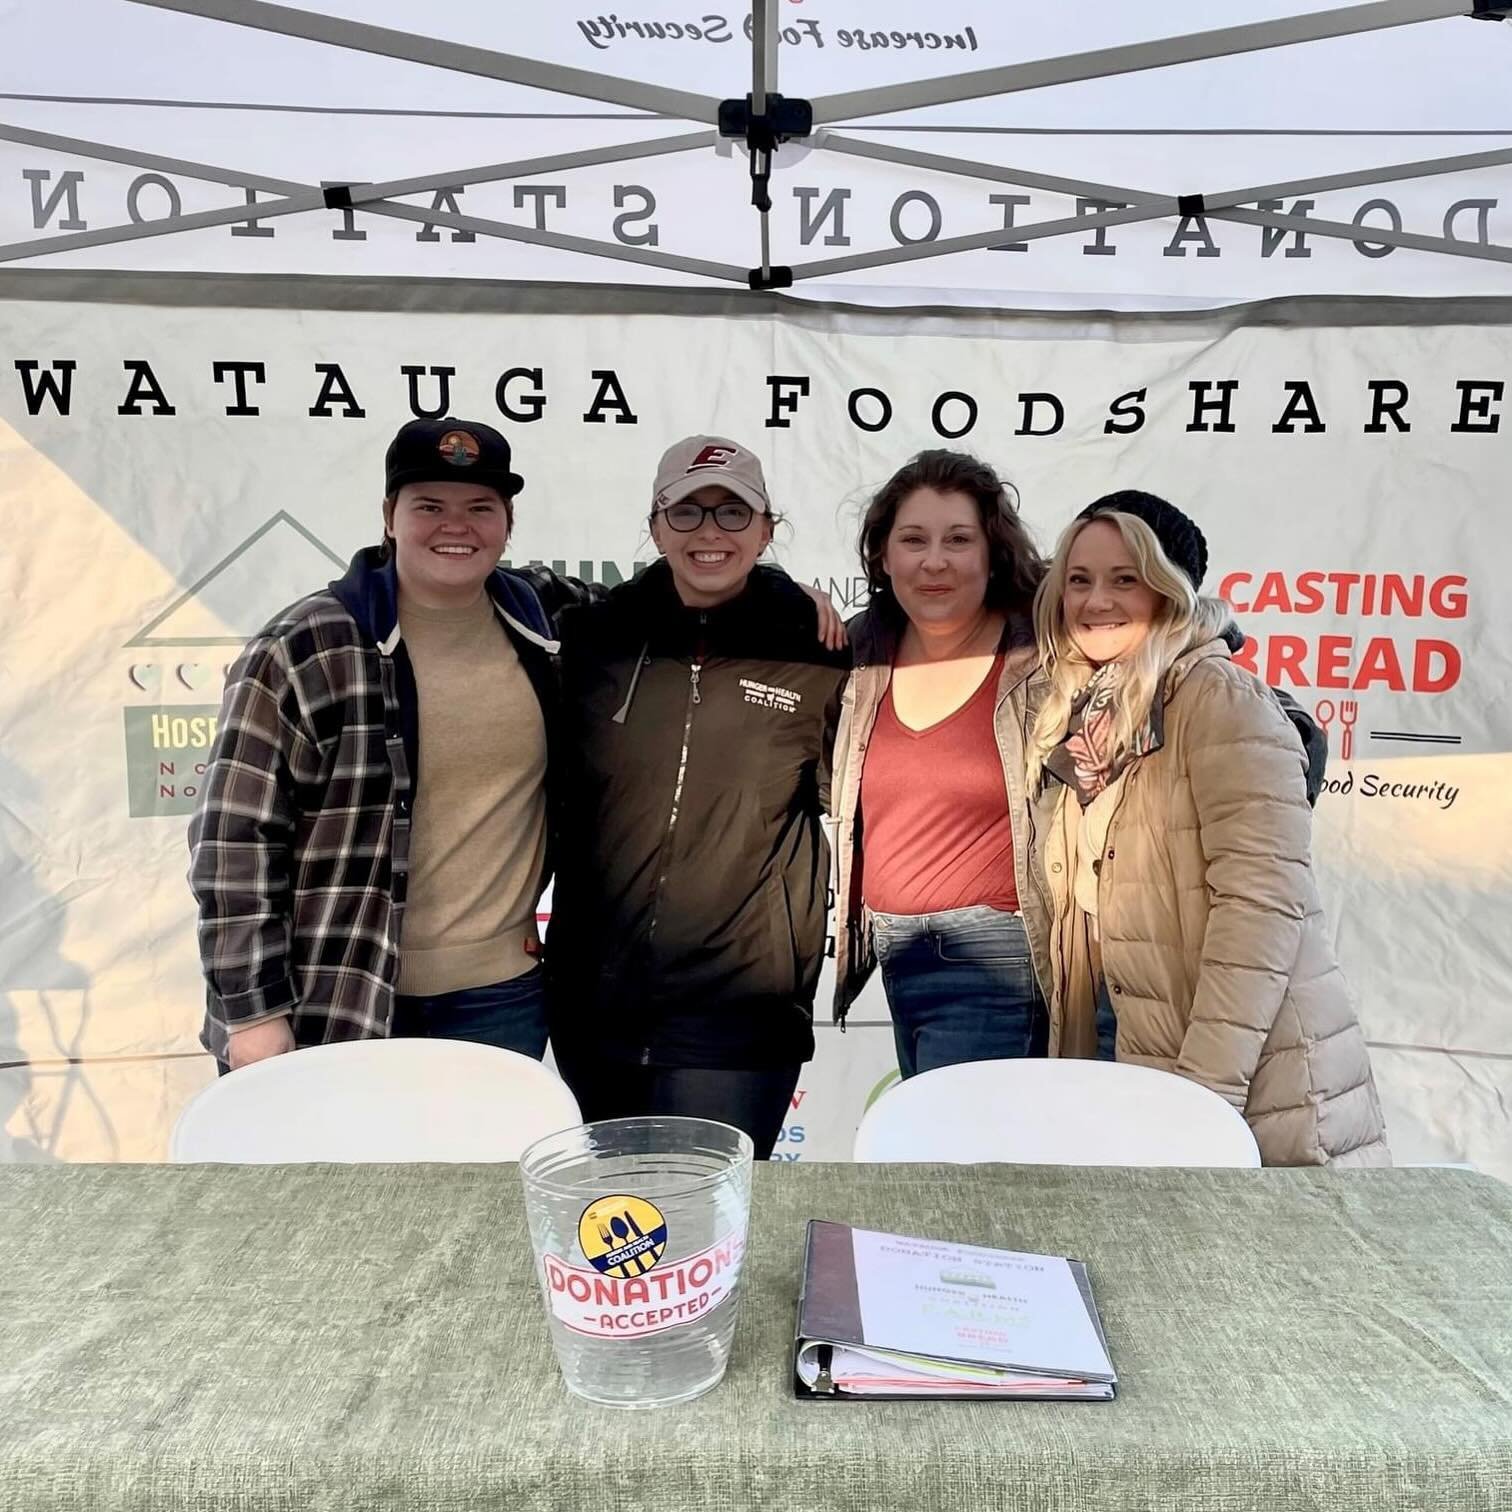 💚Let&rsquo;s hear it for the Donation Station!👏

🌱🛒 You&rsquo;ll find our Donation Station booth set up every Saturday during the season, hosted by our esteemed partner agencies: Casting Bread Ministries (@castingbread), Hunger and Health Coaliti